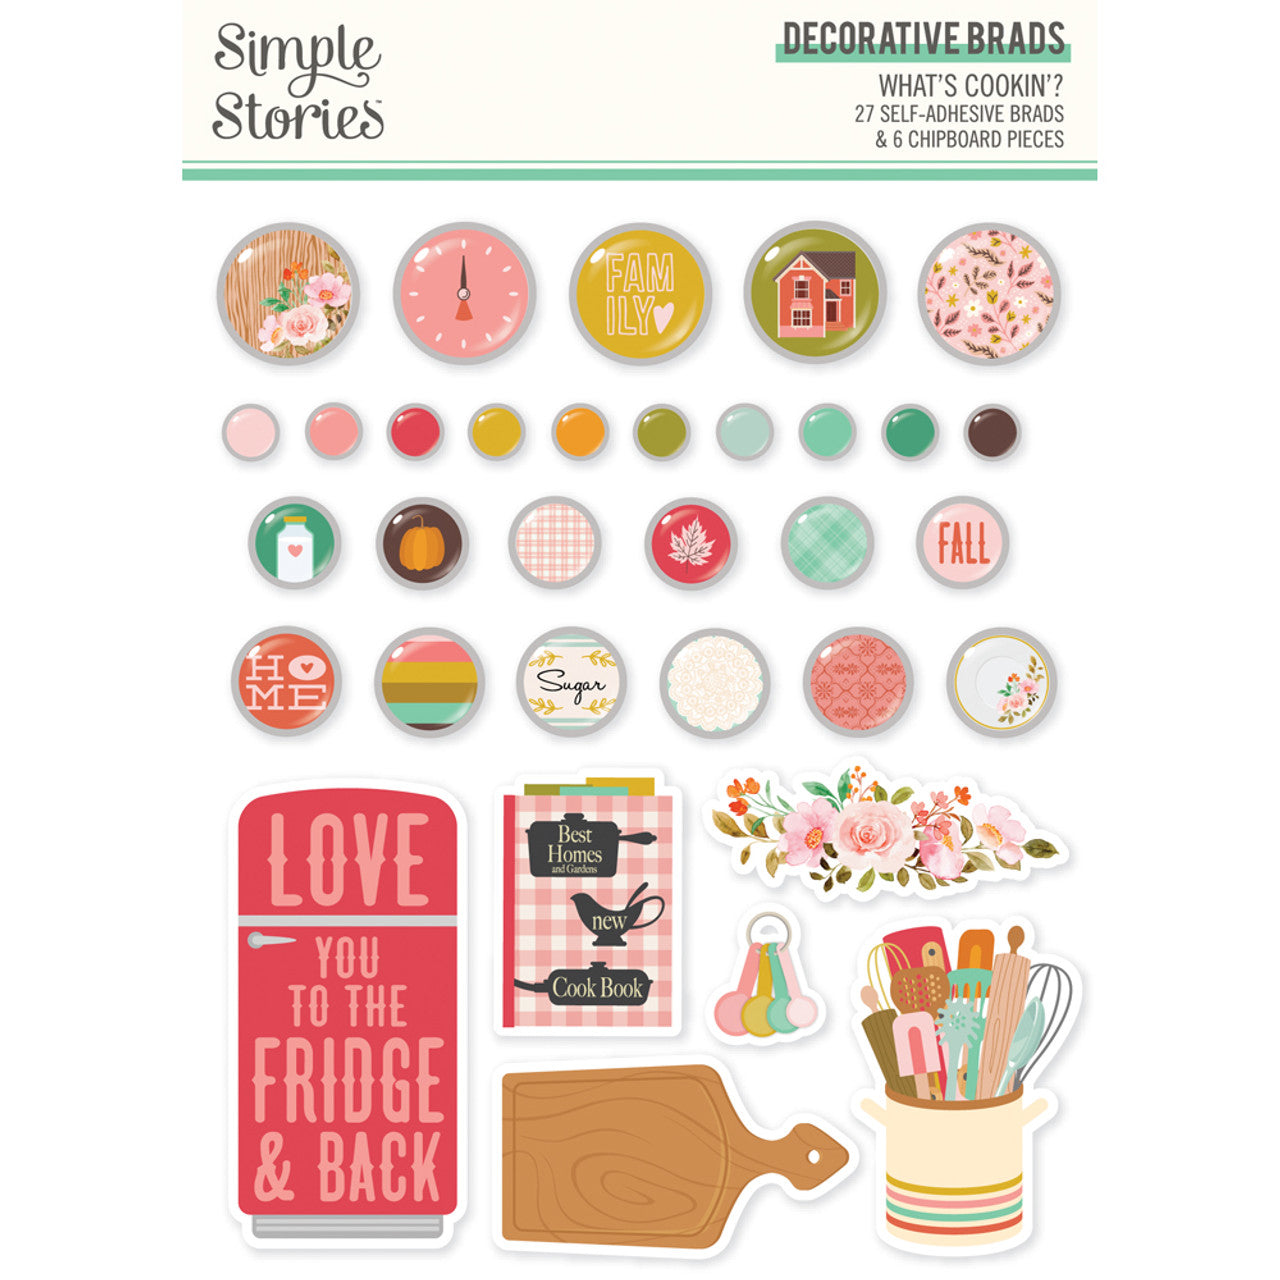 Simple Stories WHAT’S COOKIN’? Decorative BRADS &amp; CHIPBOARD Pieces 32pc